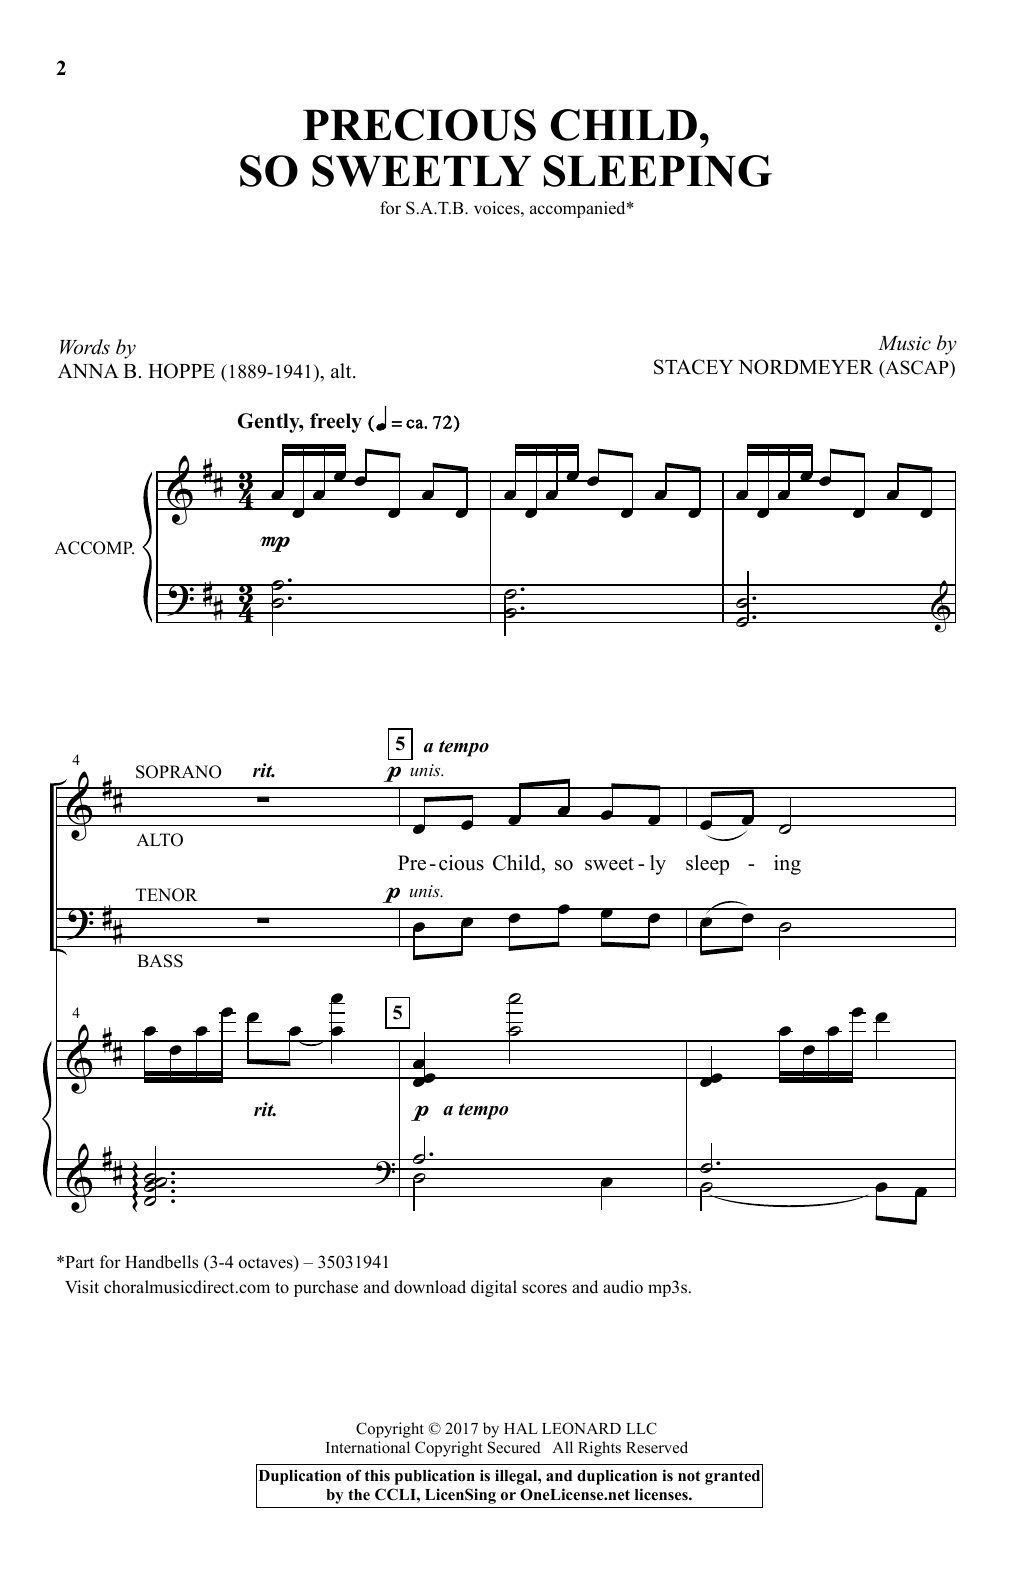 Download Stacey Nordmeyer Precious Child, So Sweetly Sleeping Sheet Music